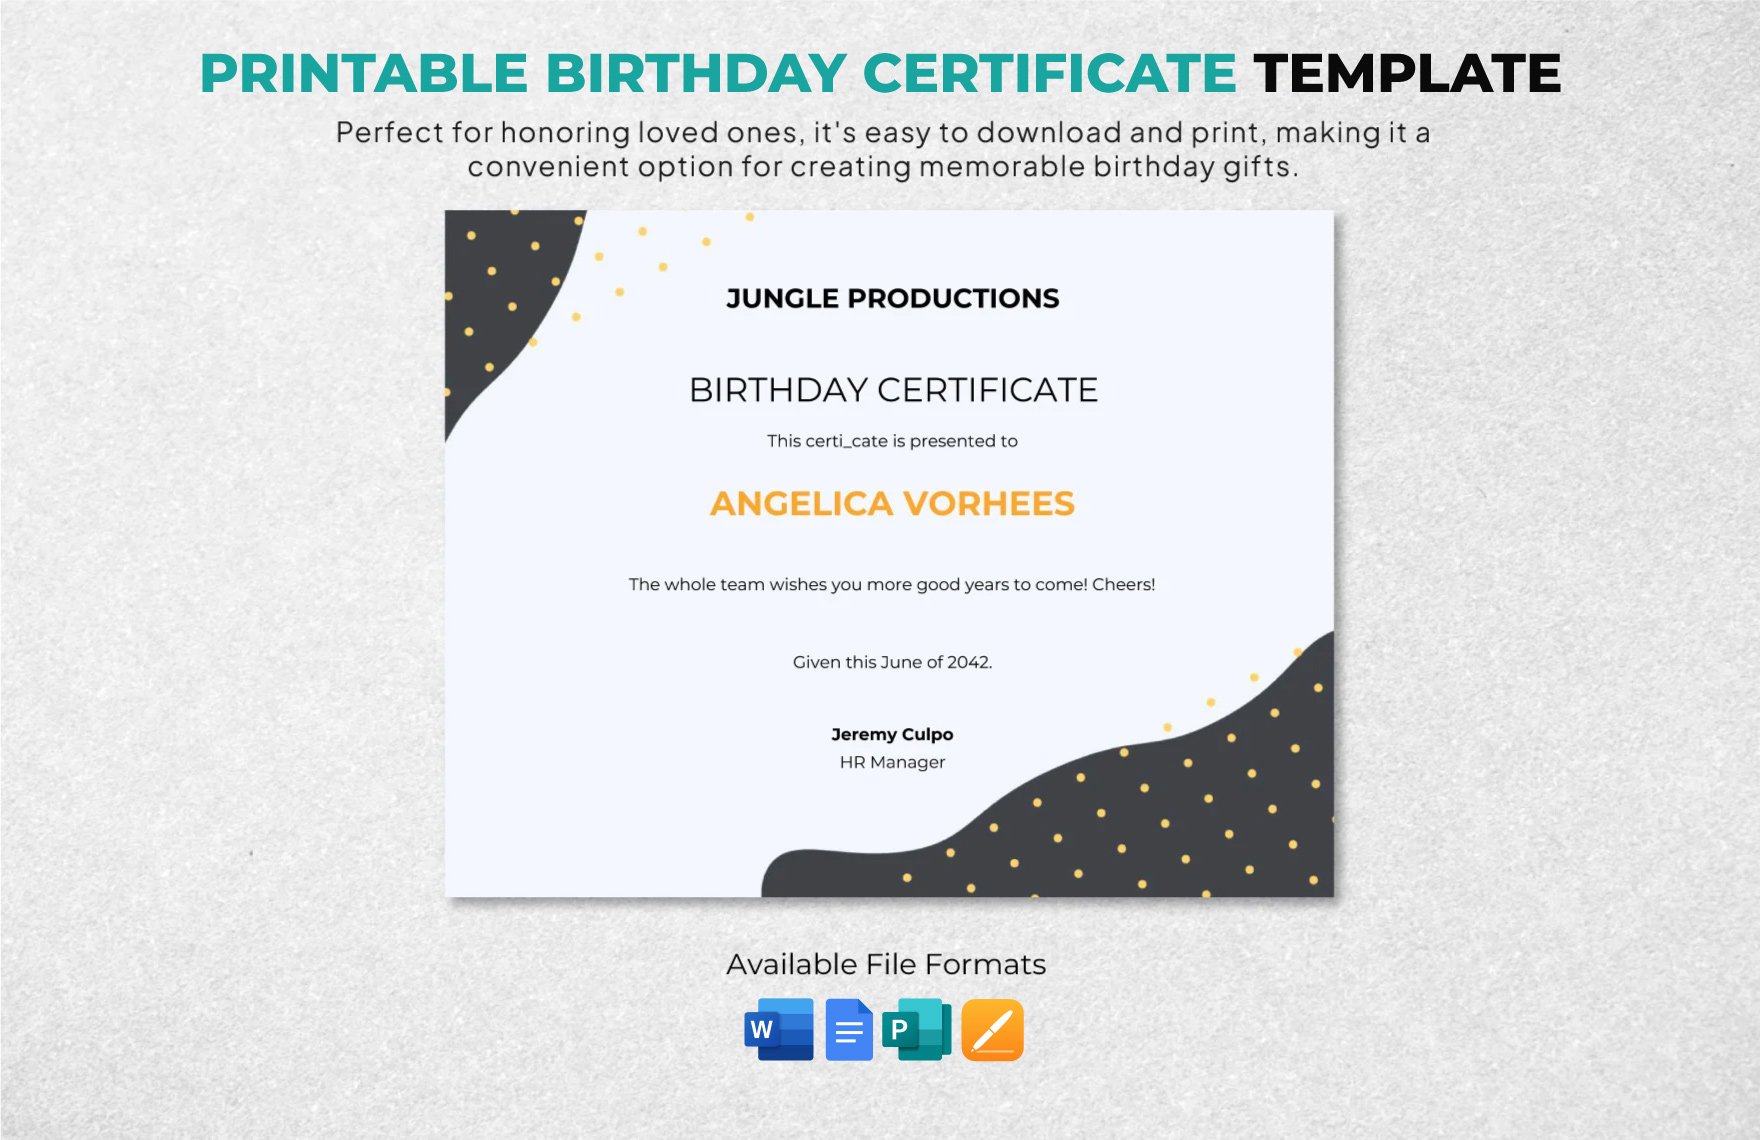 Printable Birthday Certificate Template in Word, Google Docs, Apple Pages, Publisher